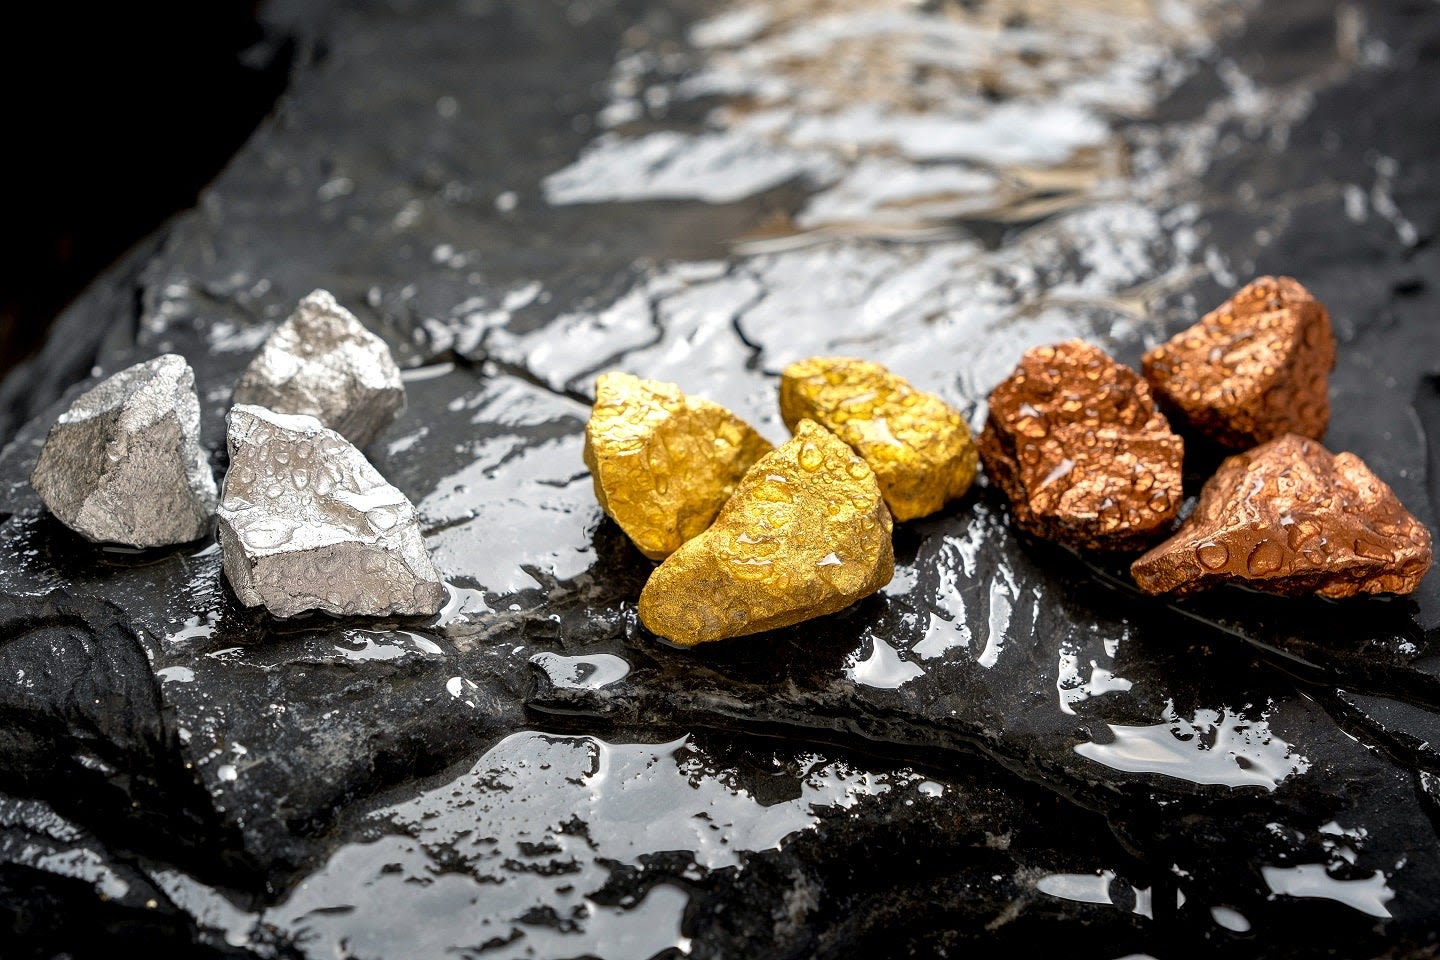 Australia’s Northern Territory, Japan partner on critical minerals